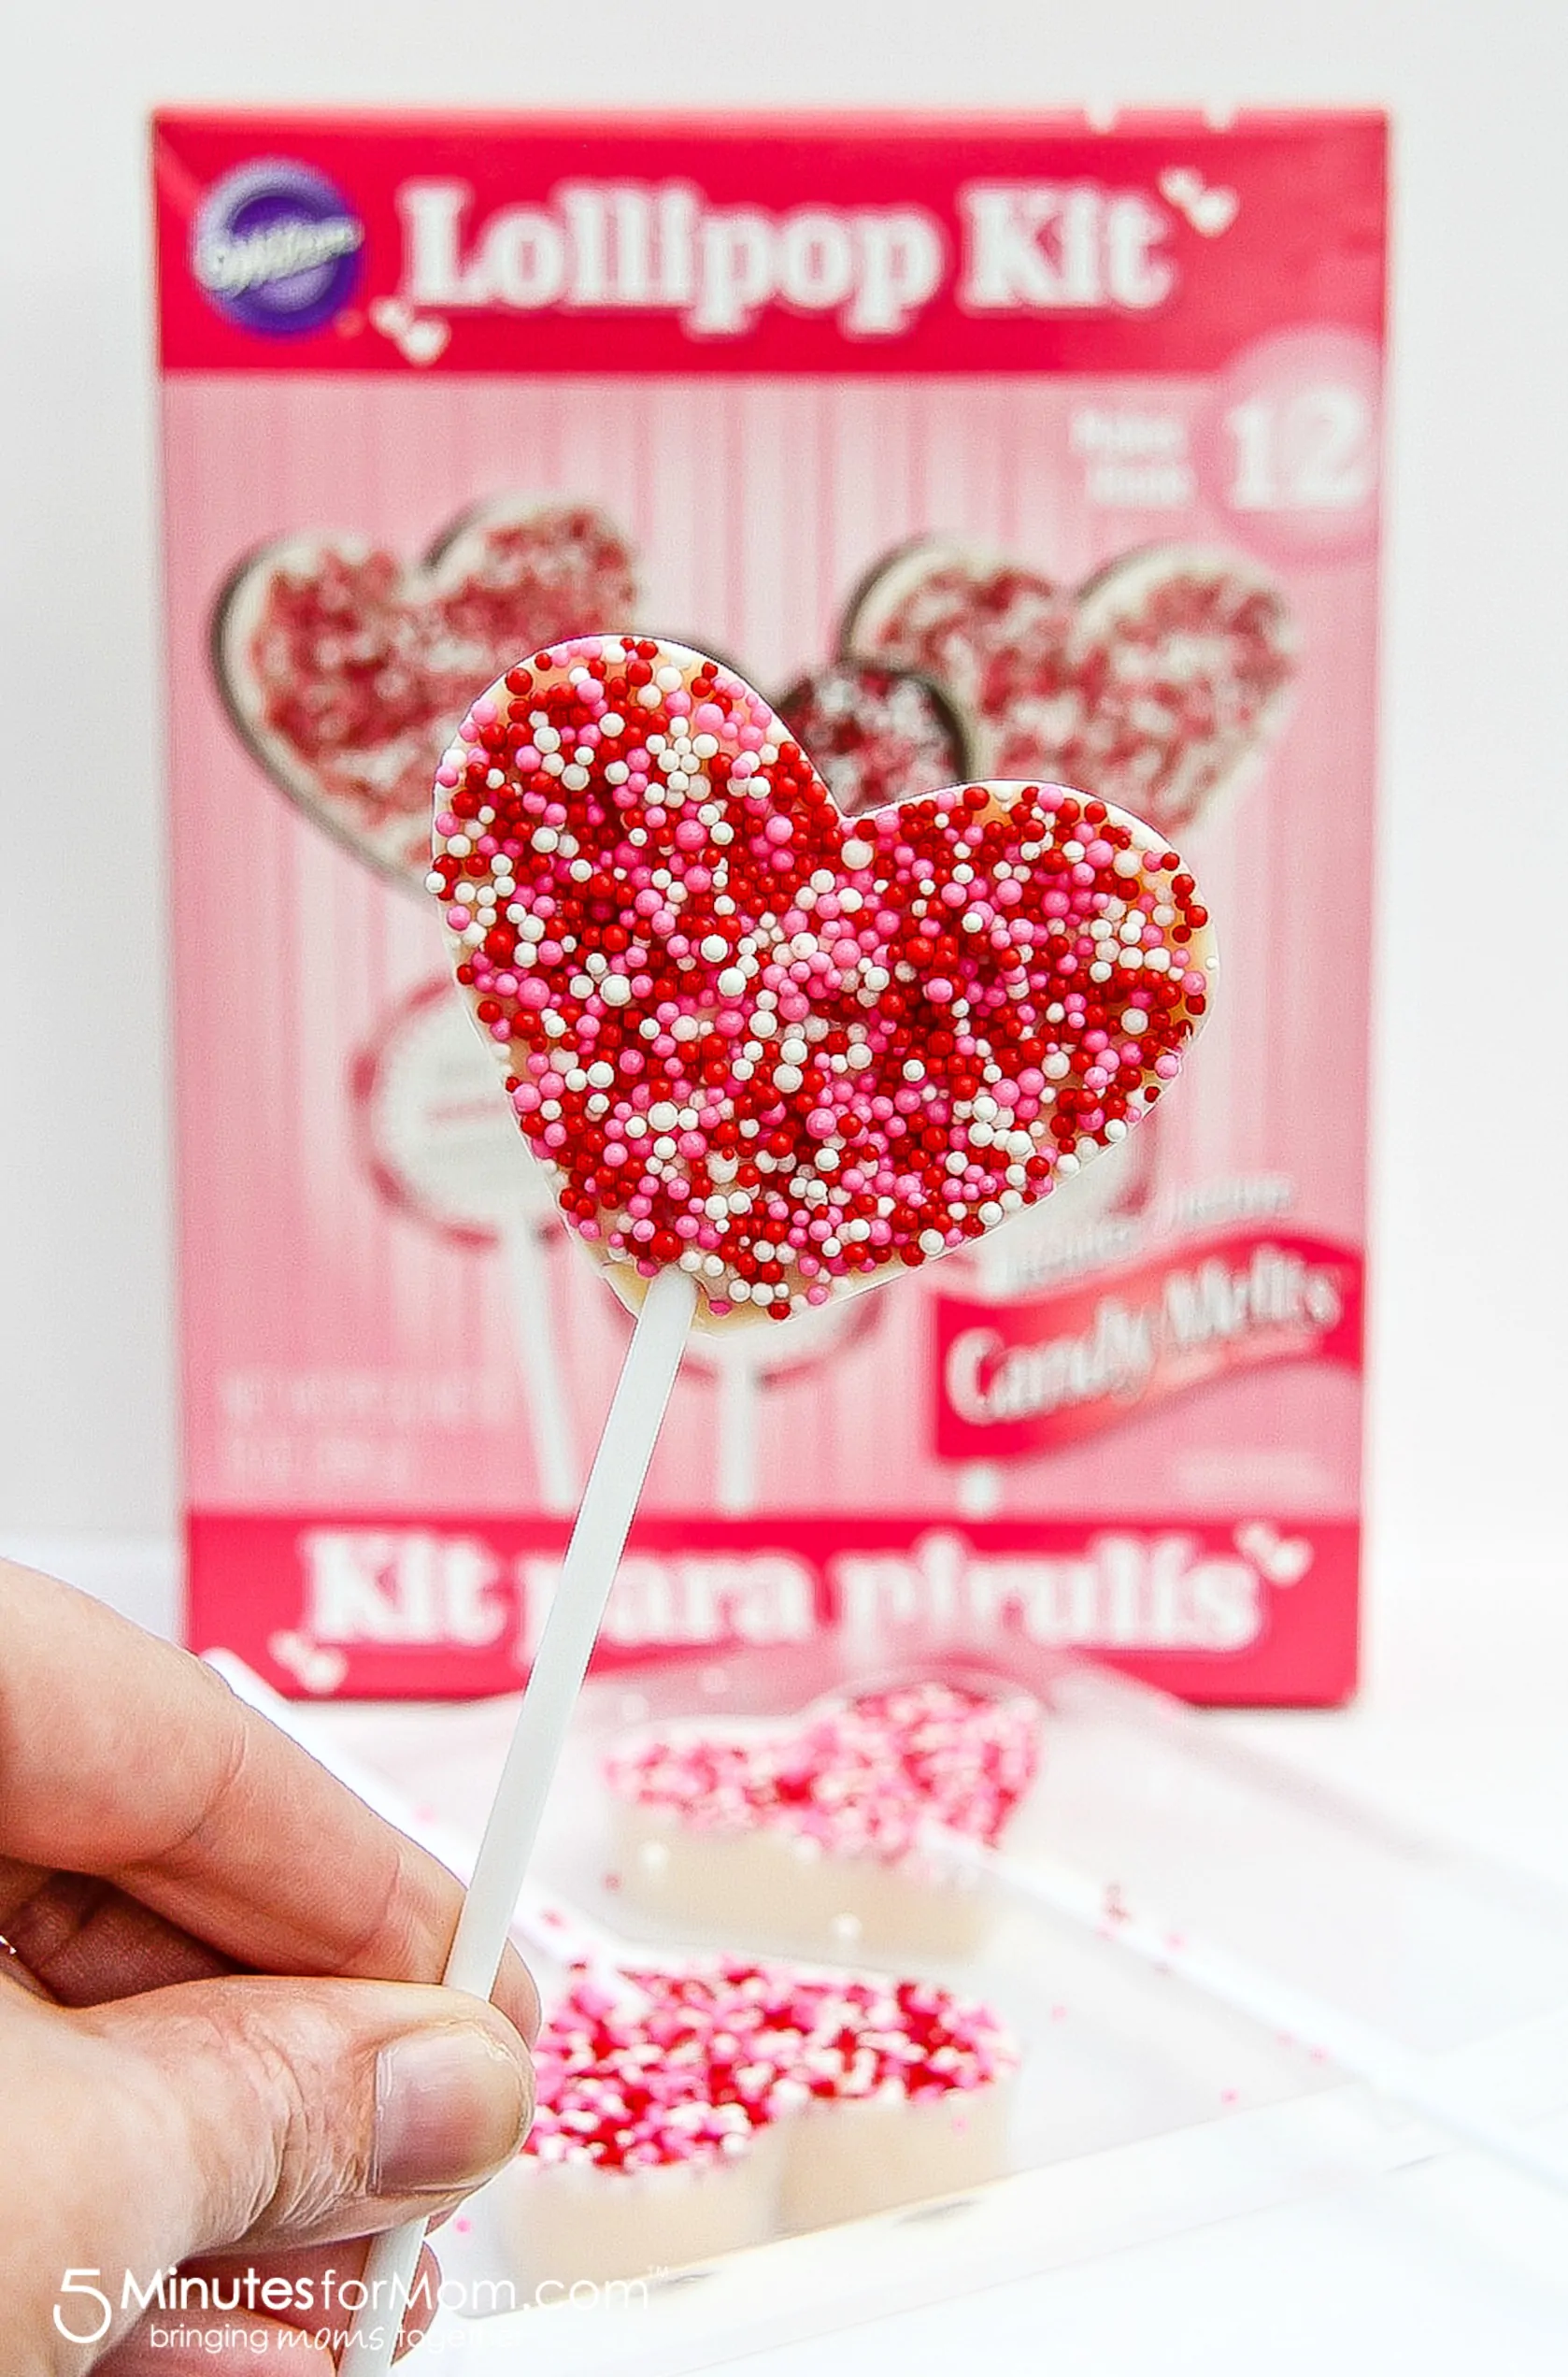 Make heart-shaped chocolate lollipop classrsoom treats with these easy kits from Party City